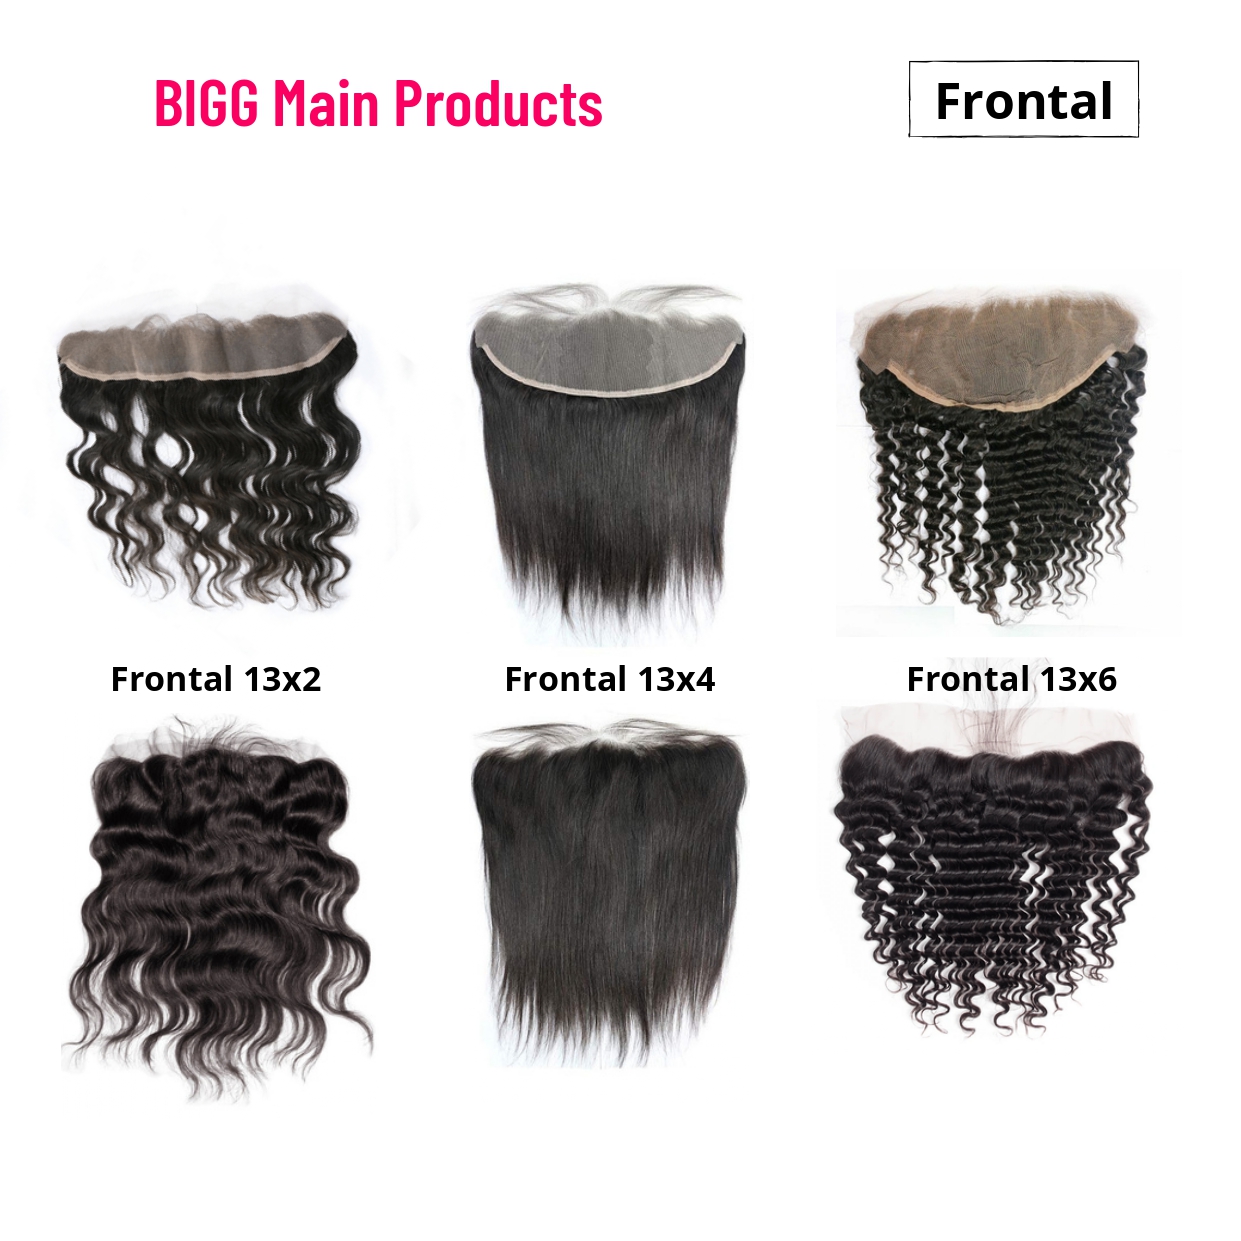 BigG Frontal has 3 main sizes: 13x2 frontal, 13x4 frontal, 13x6 frontal